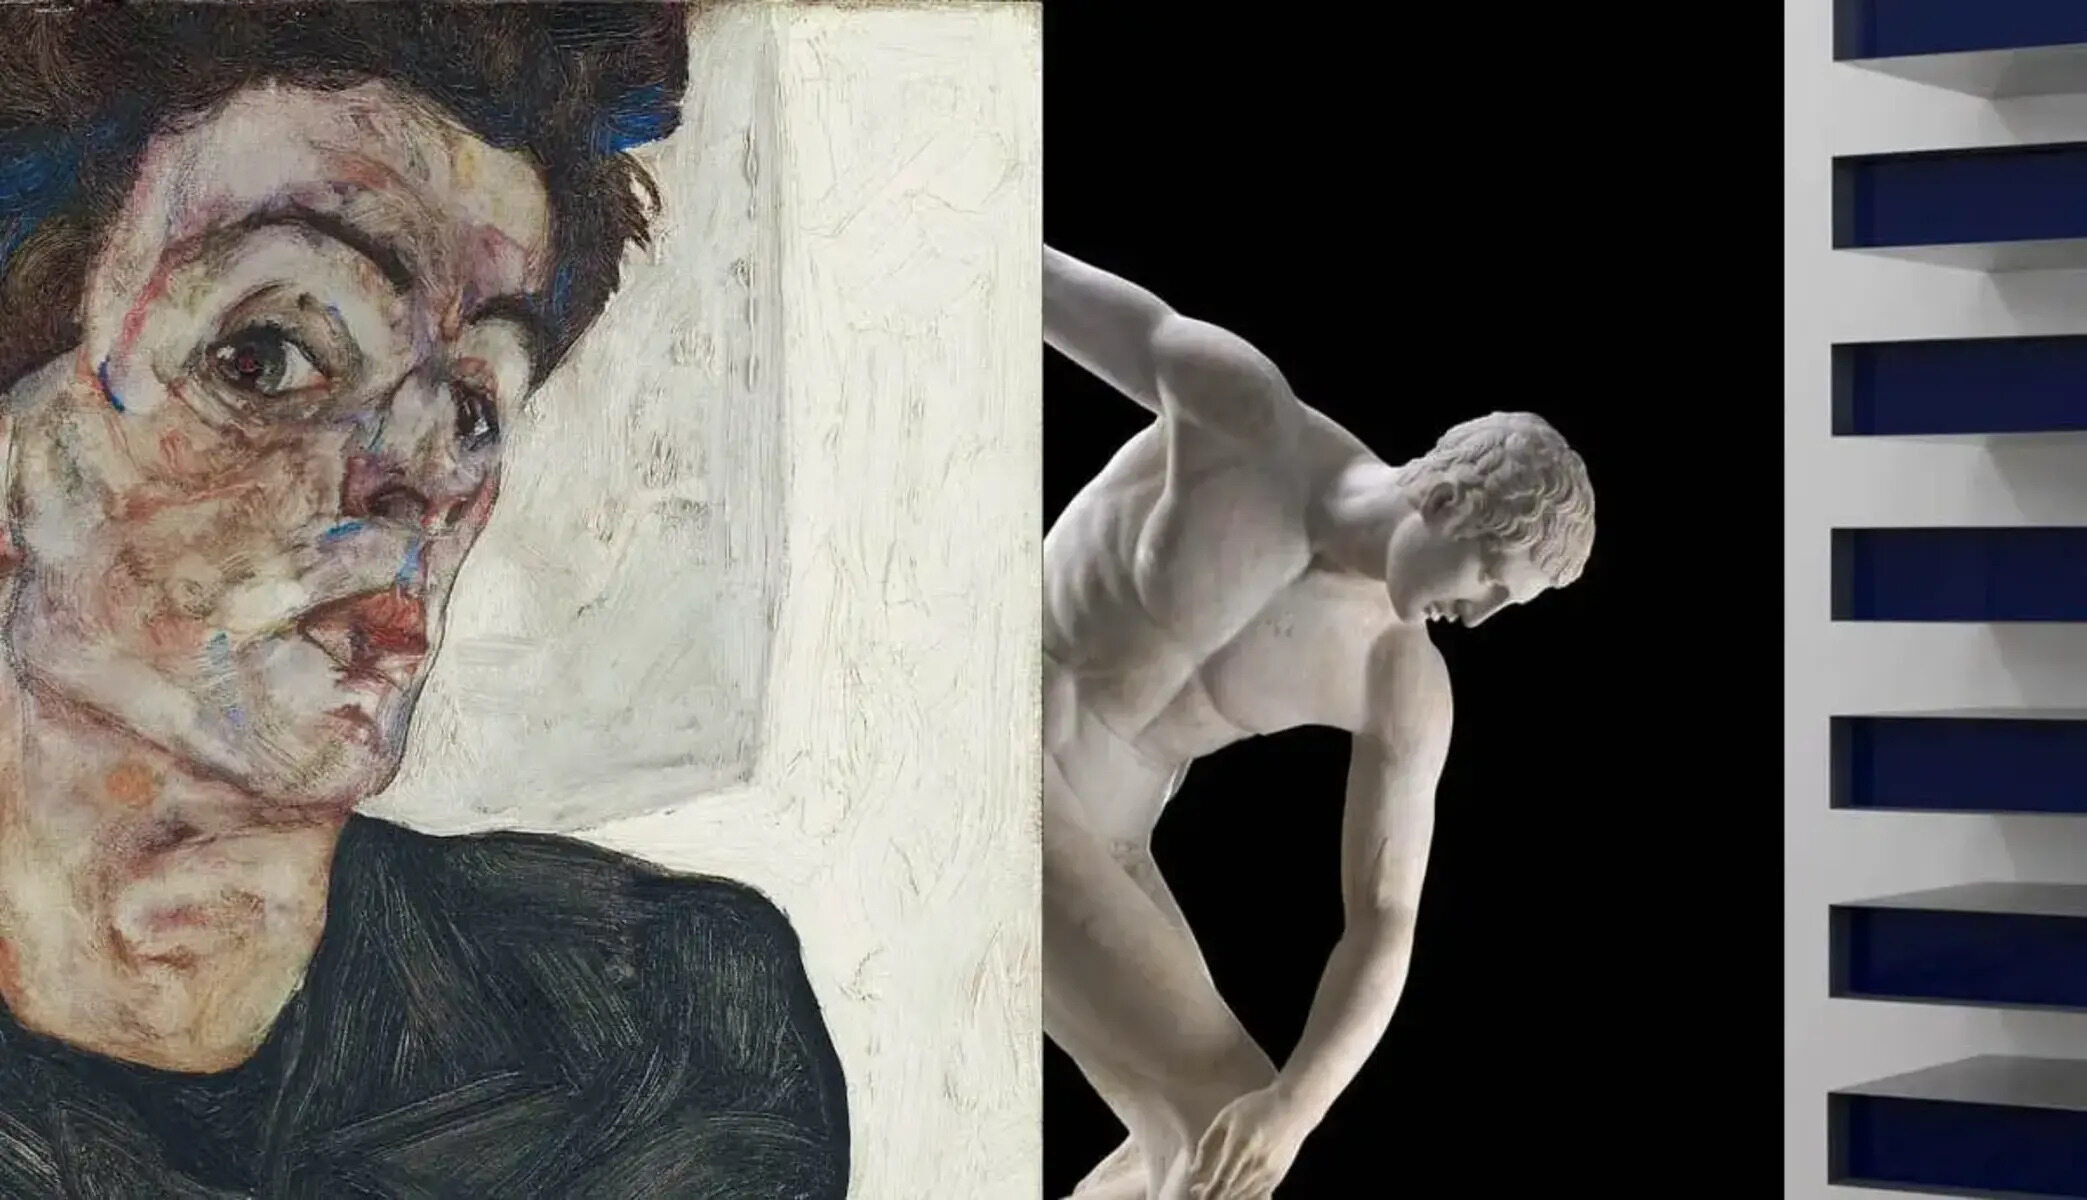 Which Sculpture Technique Is More Commonly Used By Modern Artists Than By Artists In The Past?